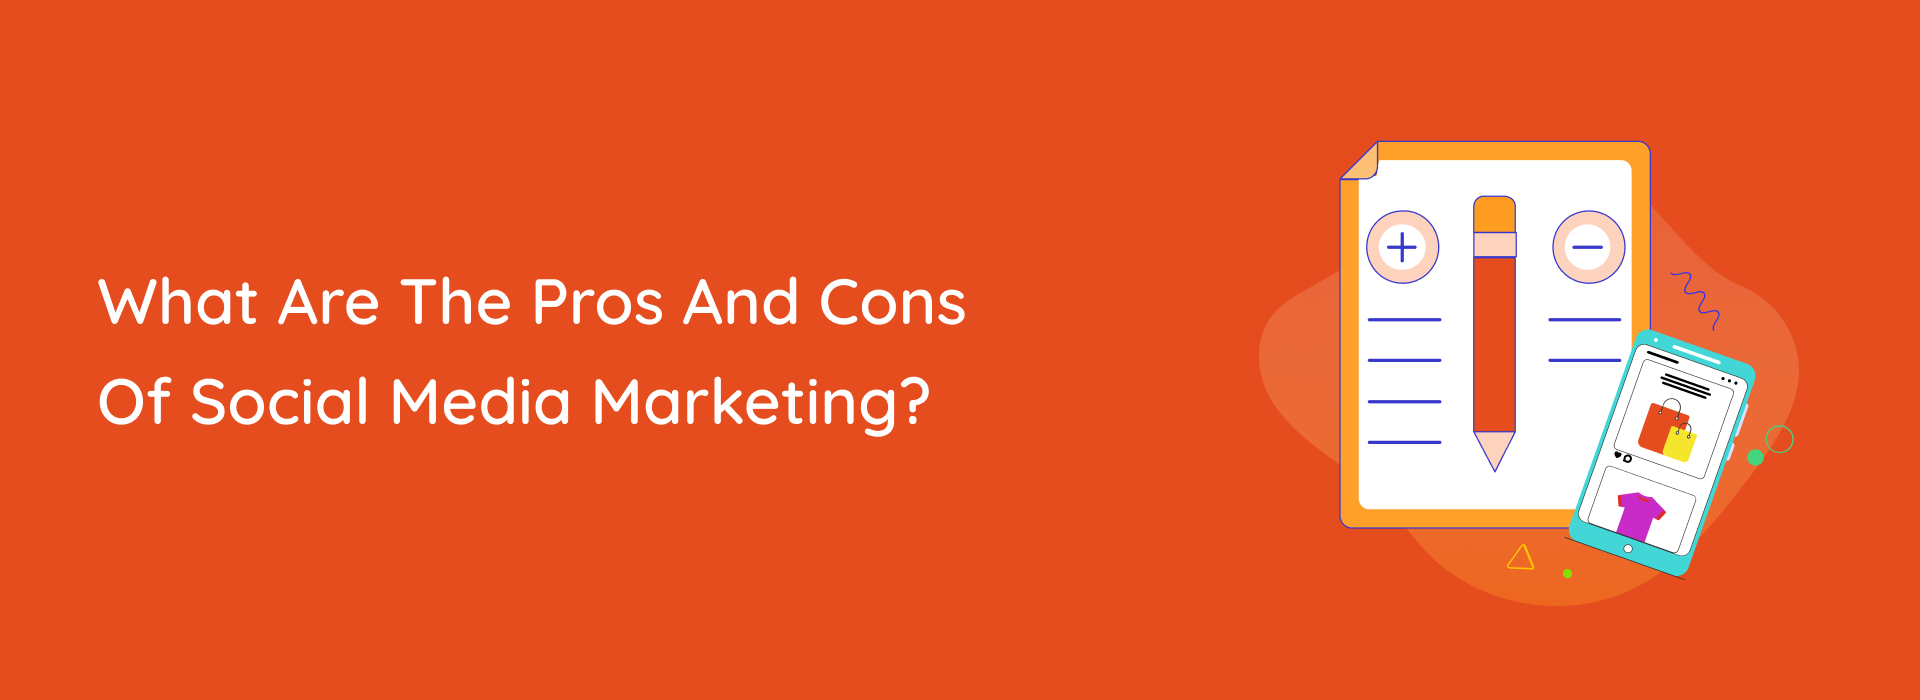 FI - What are the pros and cons of social media marketing